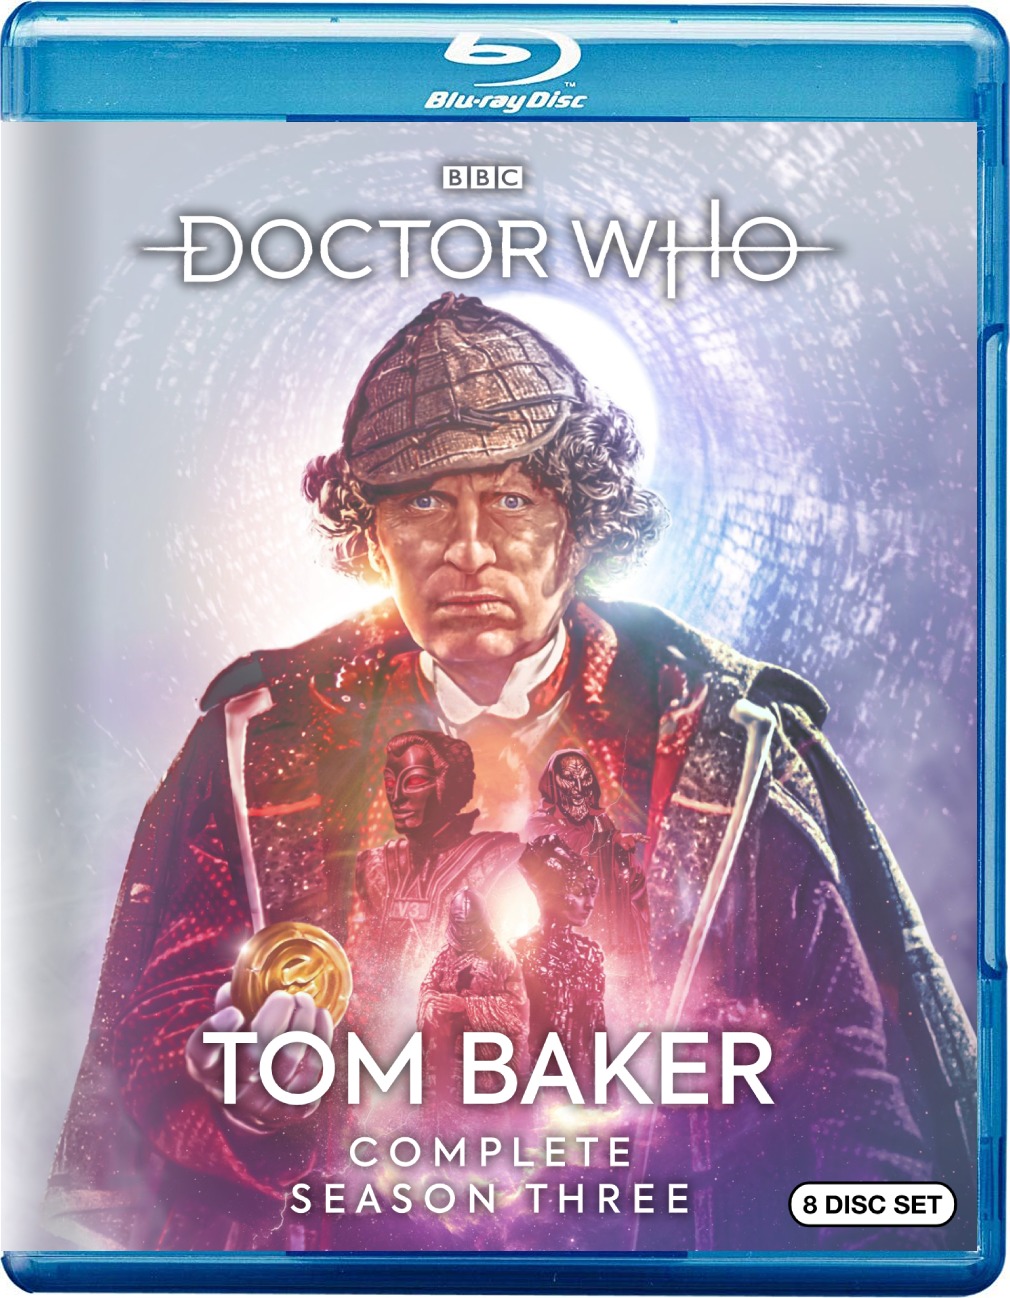 Doctor Who: Tom Baker - The Complete Season Three